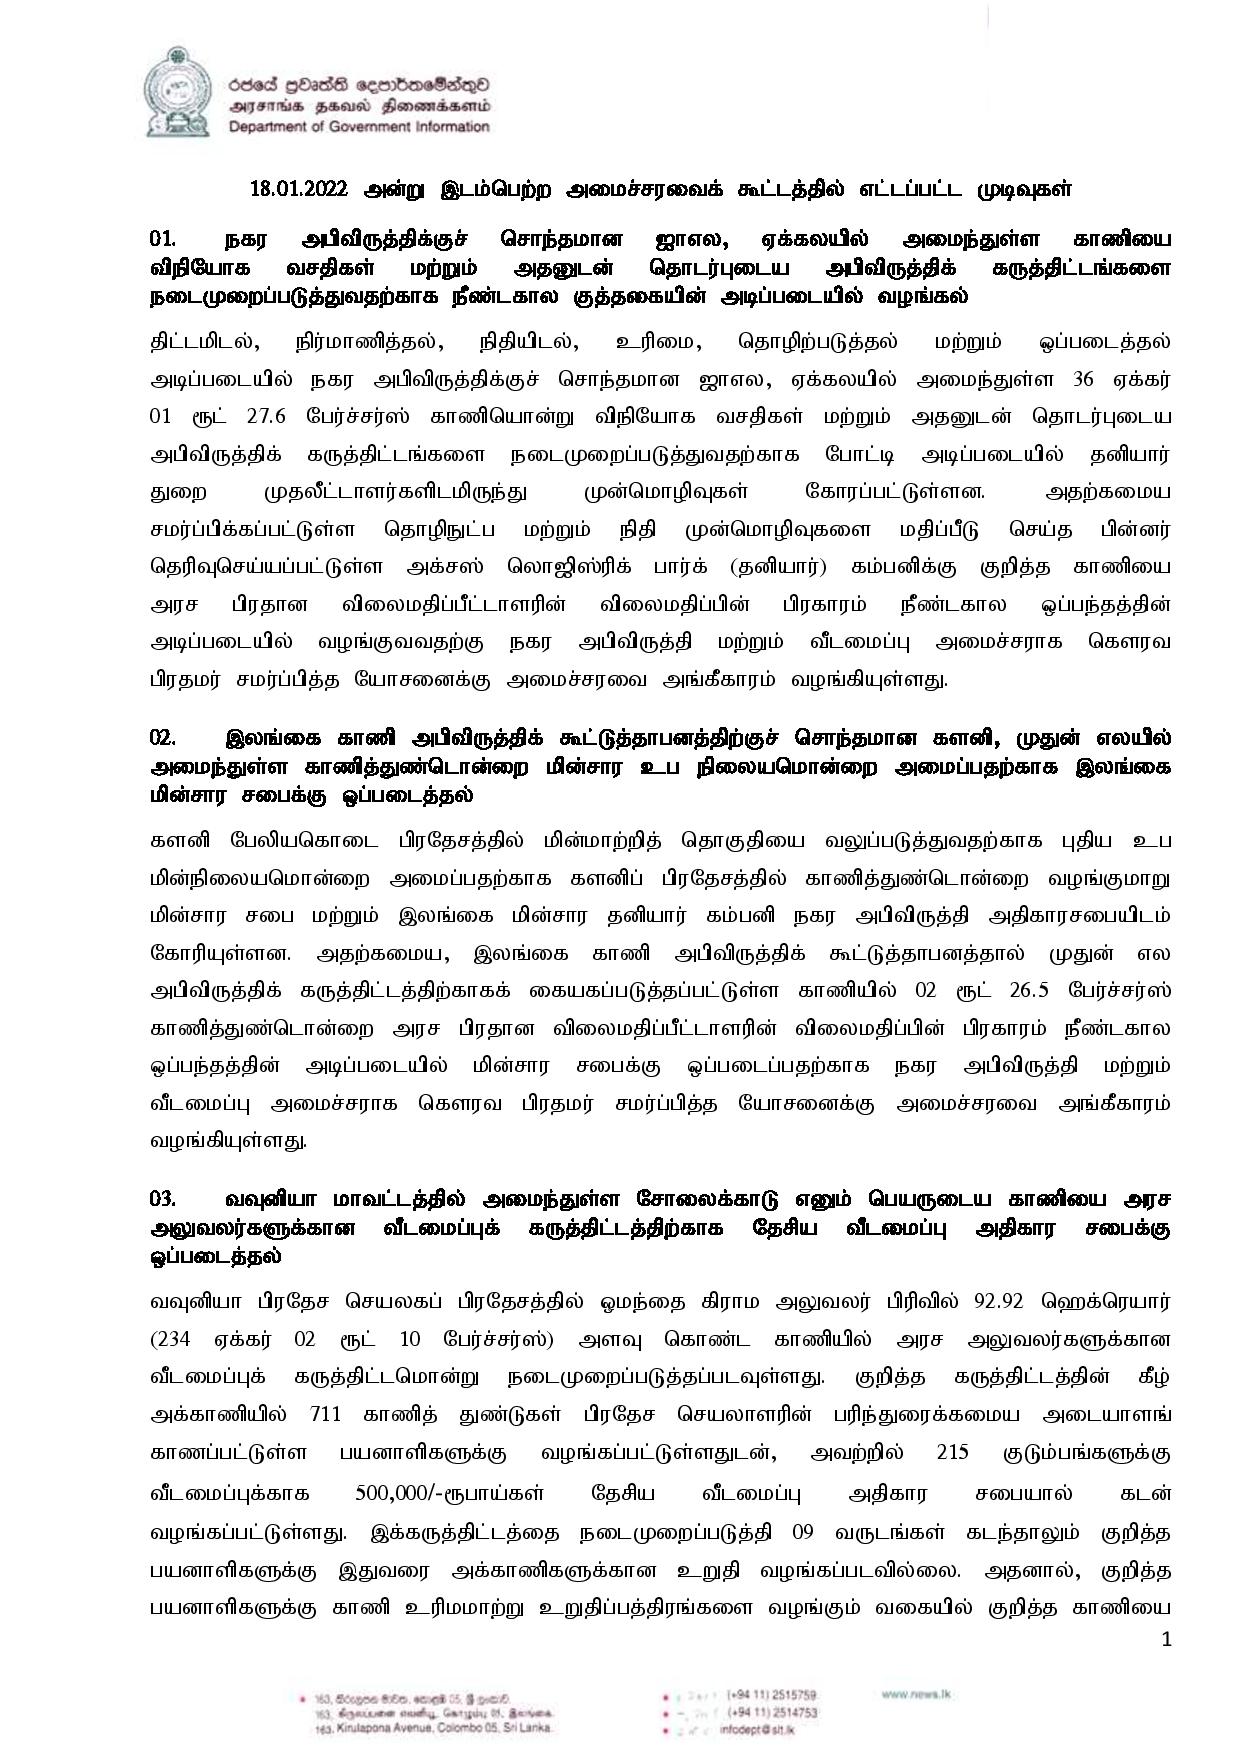 Cabinet Decisions on 18.01.2022 Tamil page 001